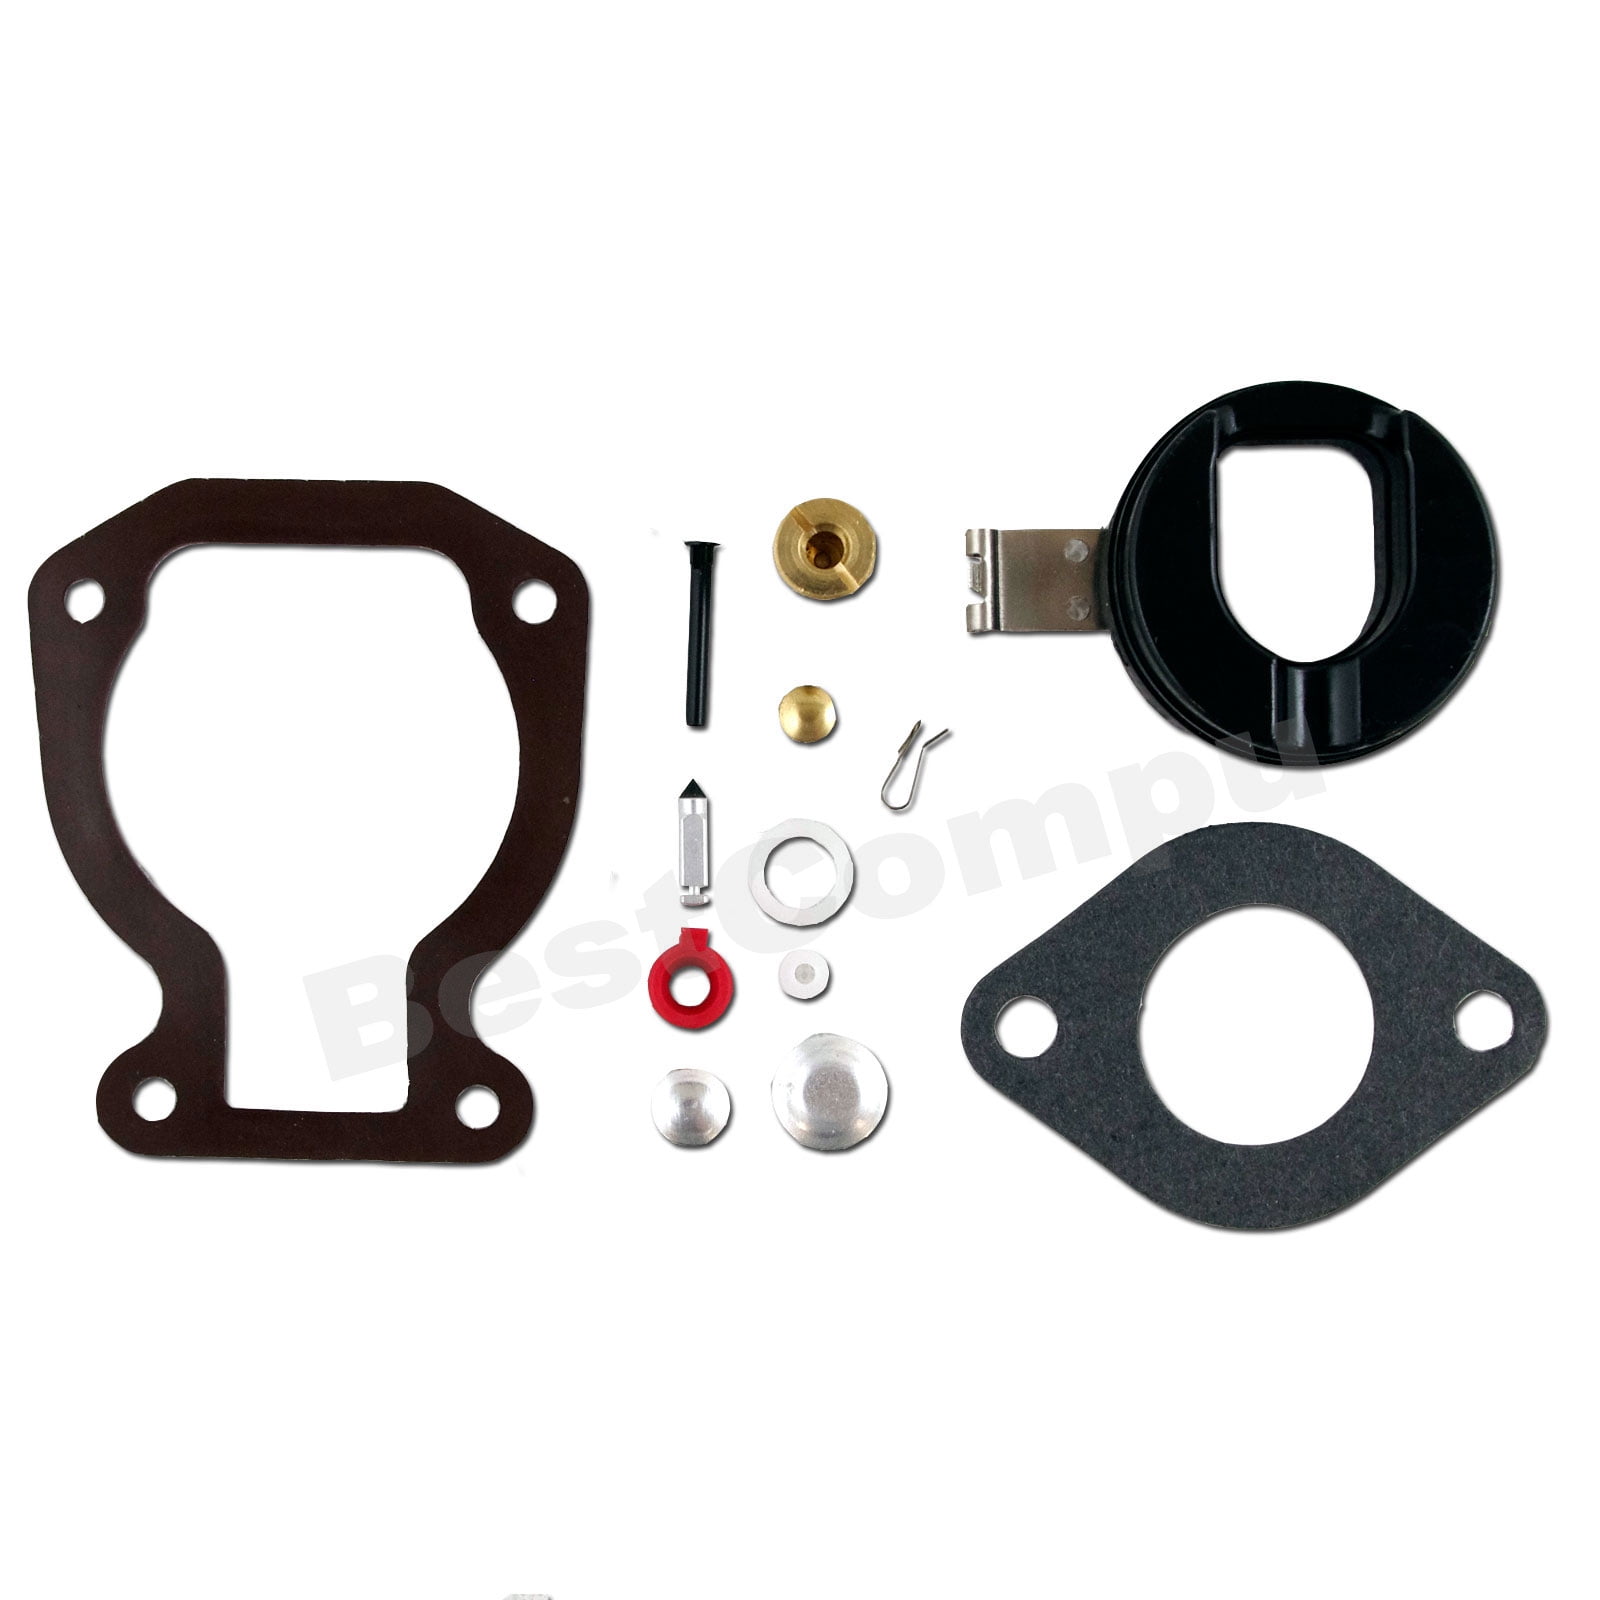 XQSM Carburetor Carb Kit with Float Compatible with Johnson Evinrude 4 4.5 5 6 7 8 9.9 14 15 HP 1974-1988 Replace 398453 398452 391305 439072 391937 